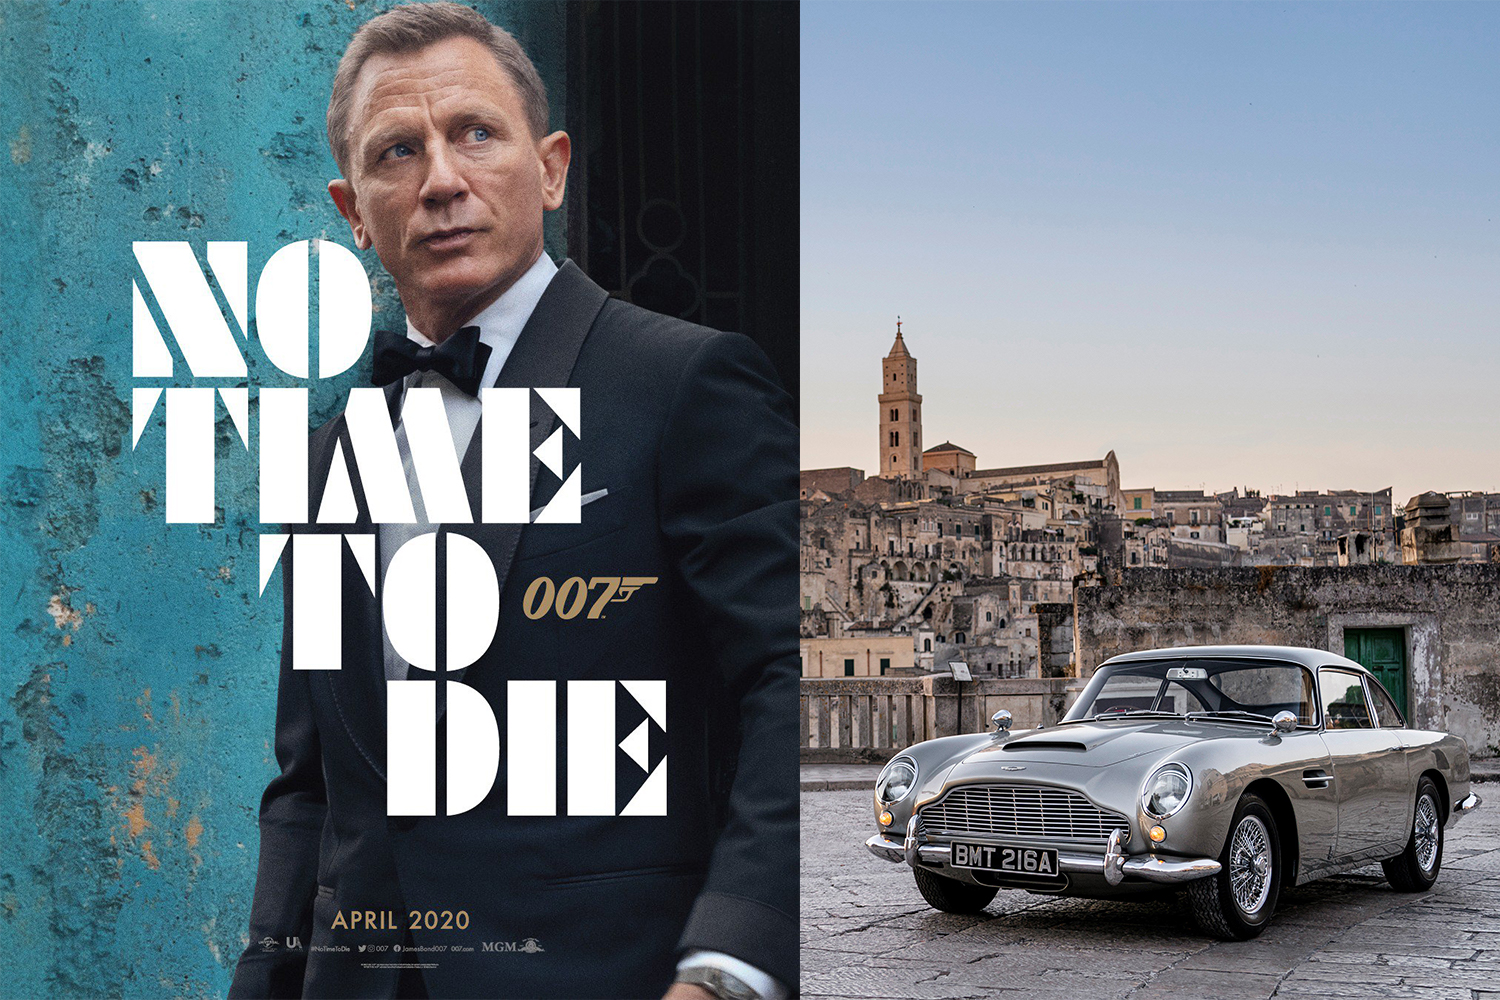 Aston Martin Cars in James Bond "No Time to Die"